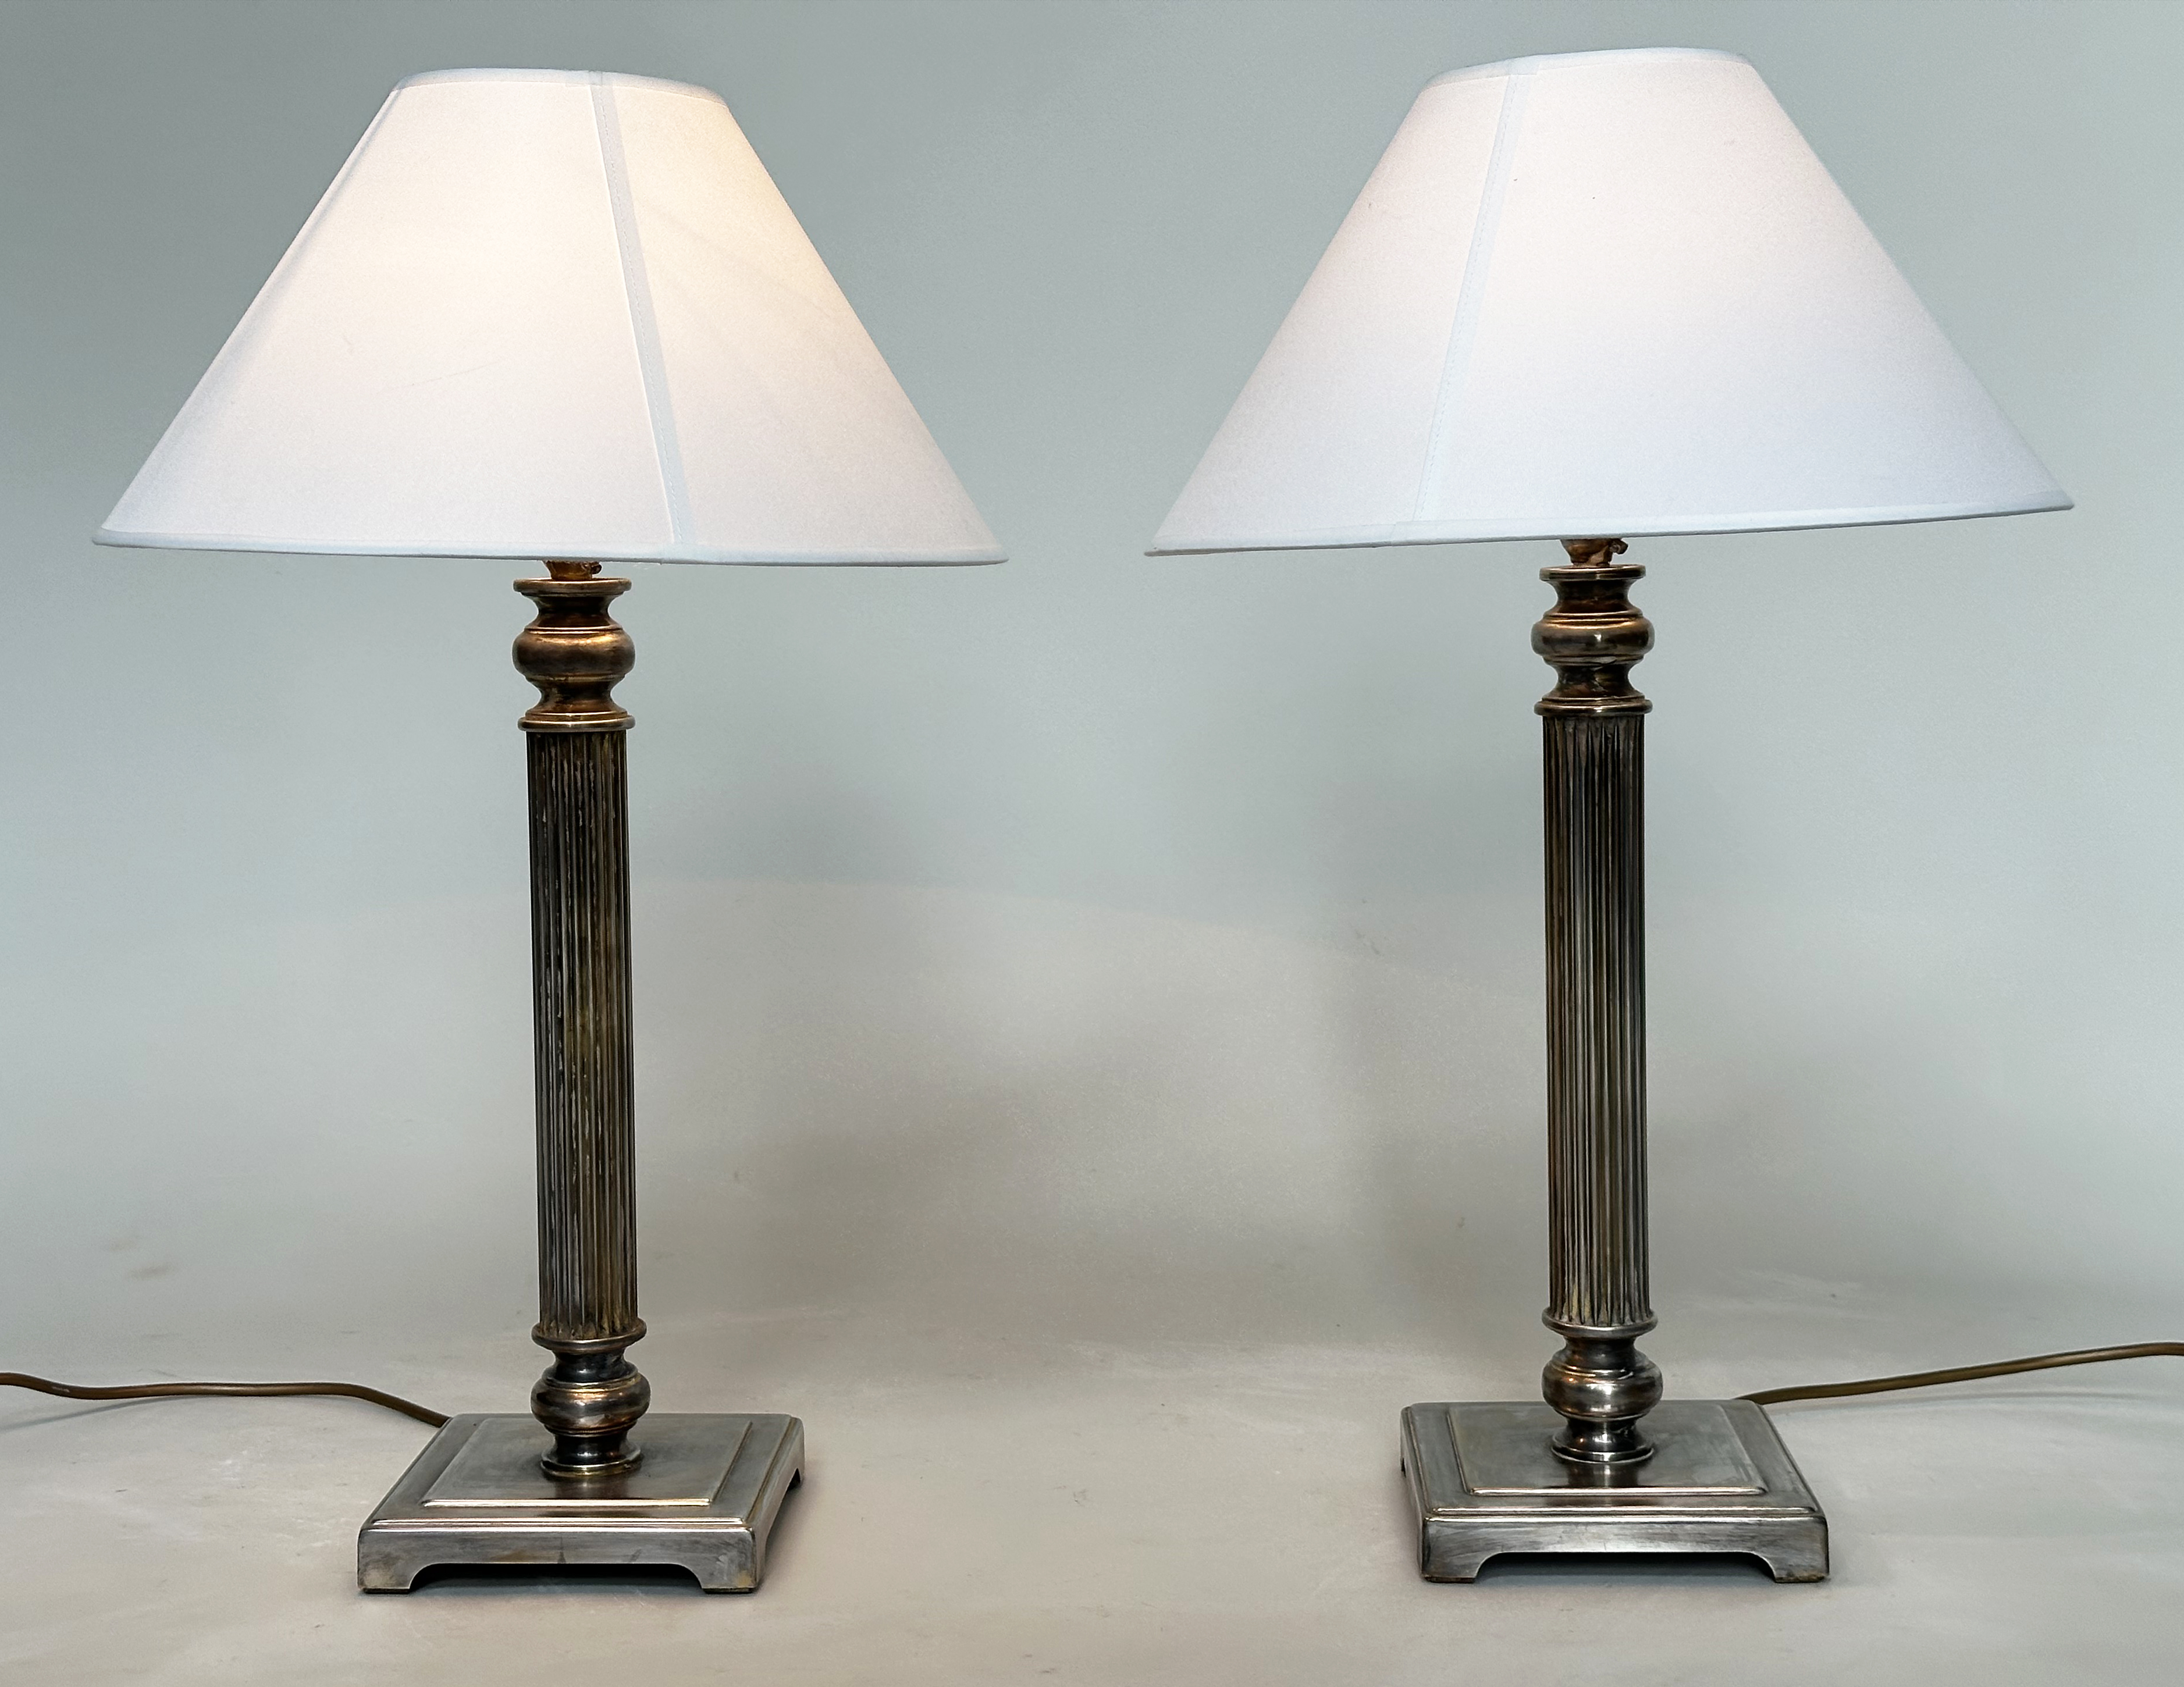 TABLE LAMPS, a pair, silvered metal each with reeded column, and square bases (with shades), 66cm H. - Image 6 of 6